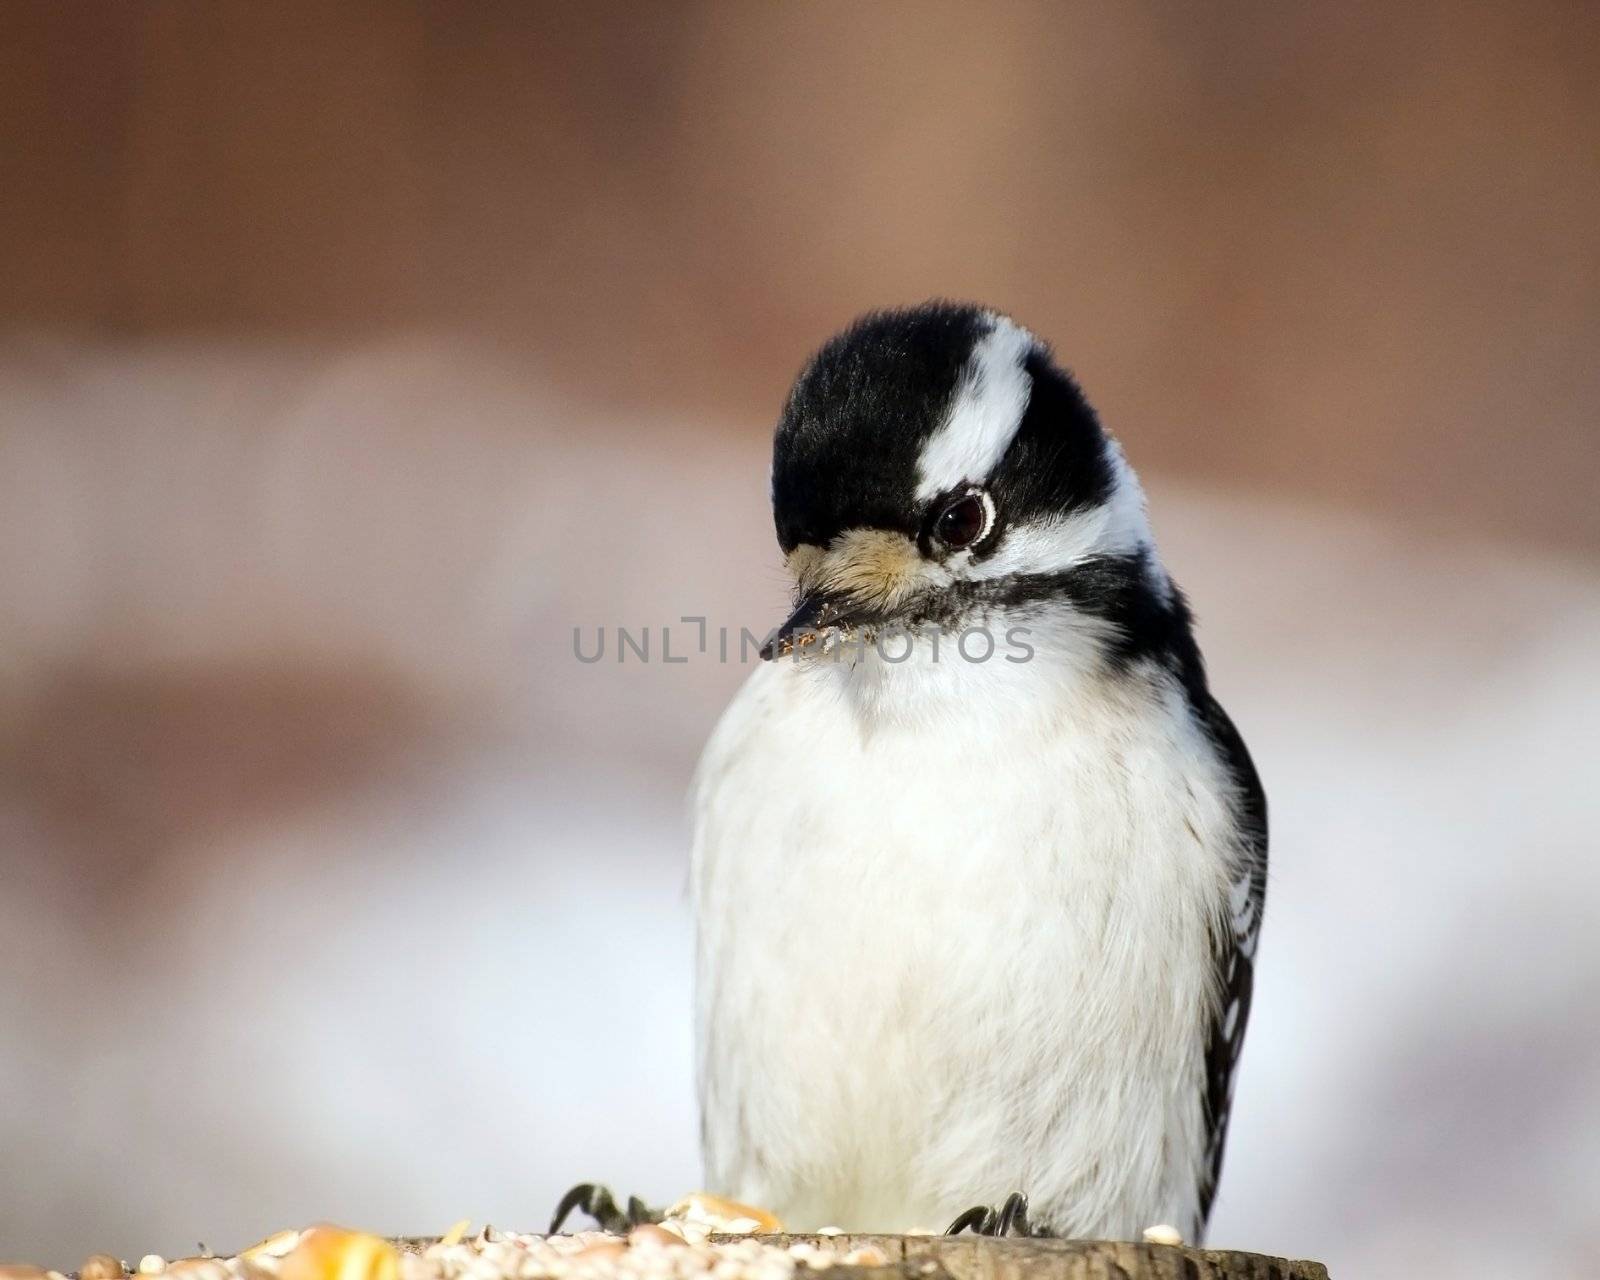 A downy woodpecker perched on a post looking at bird seed.